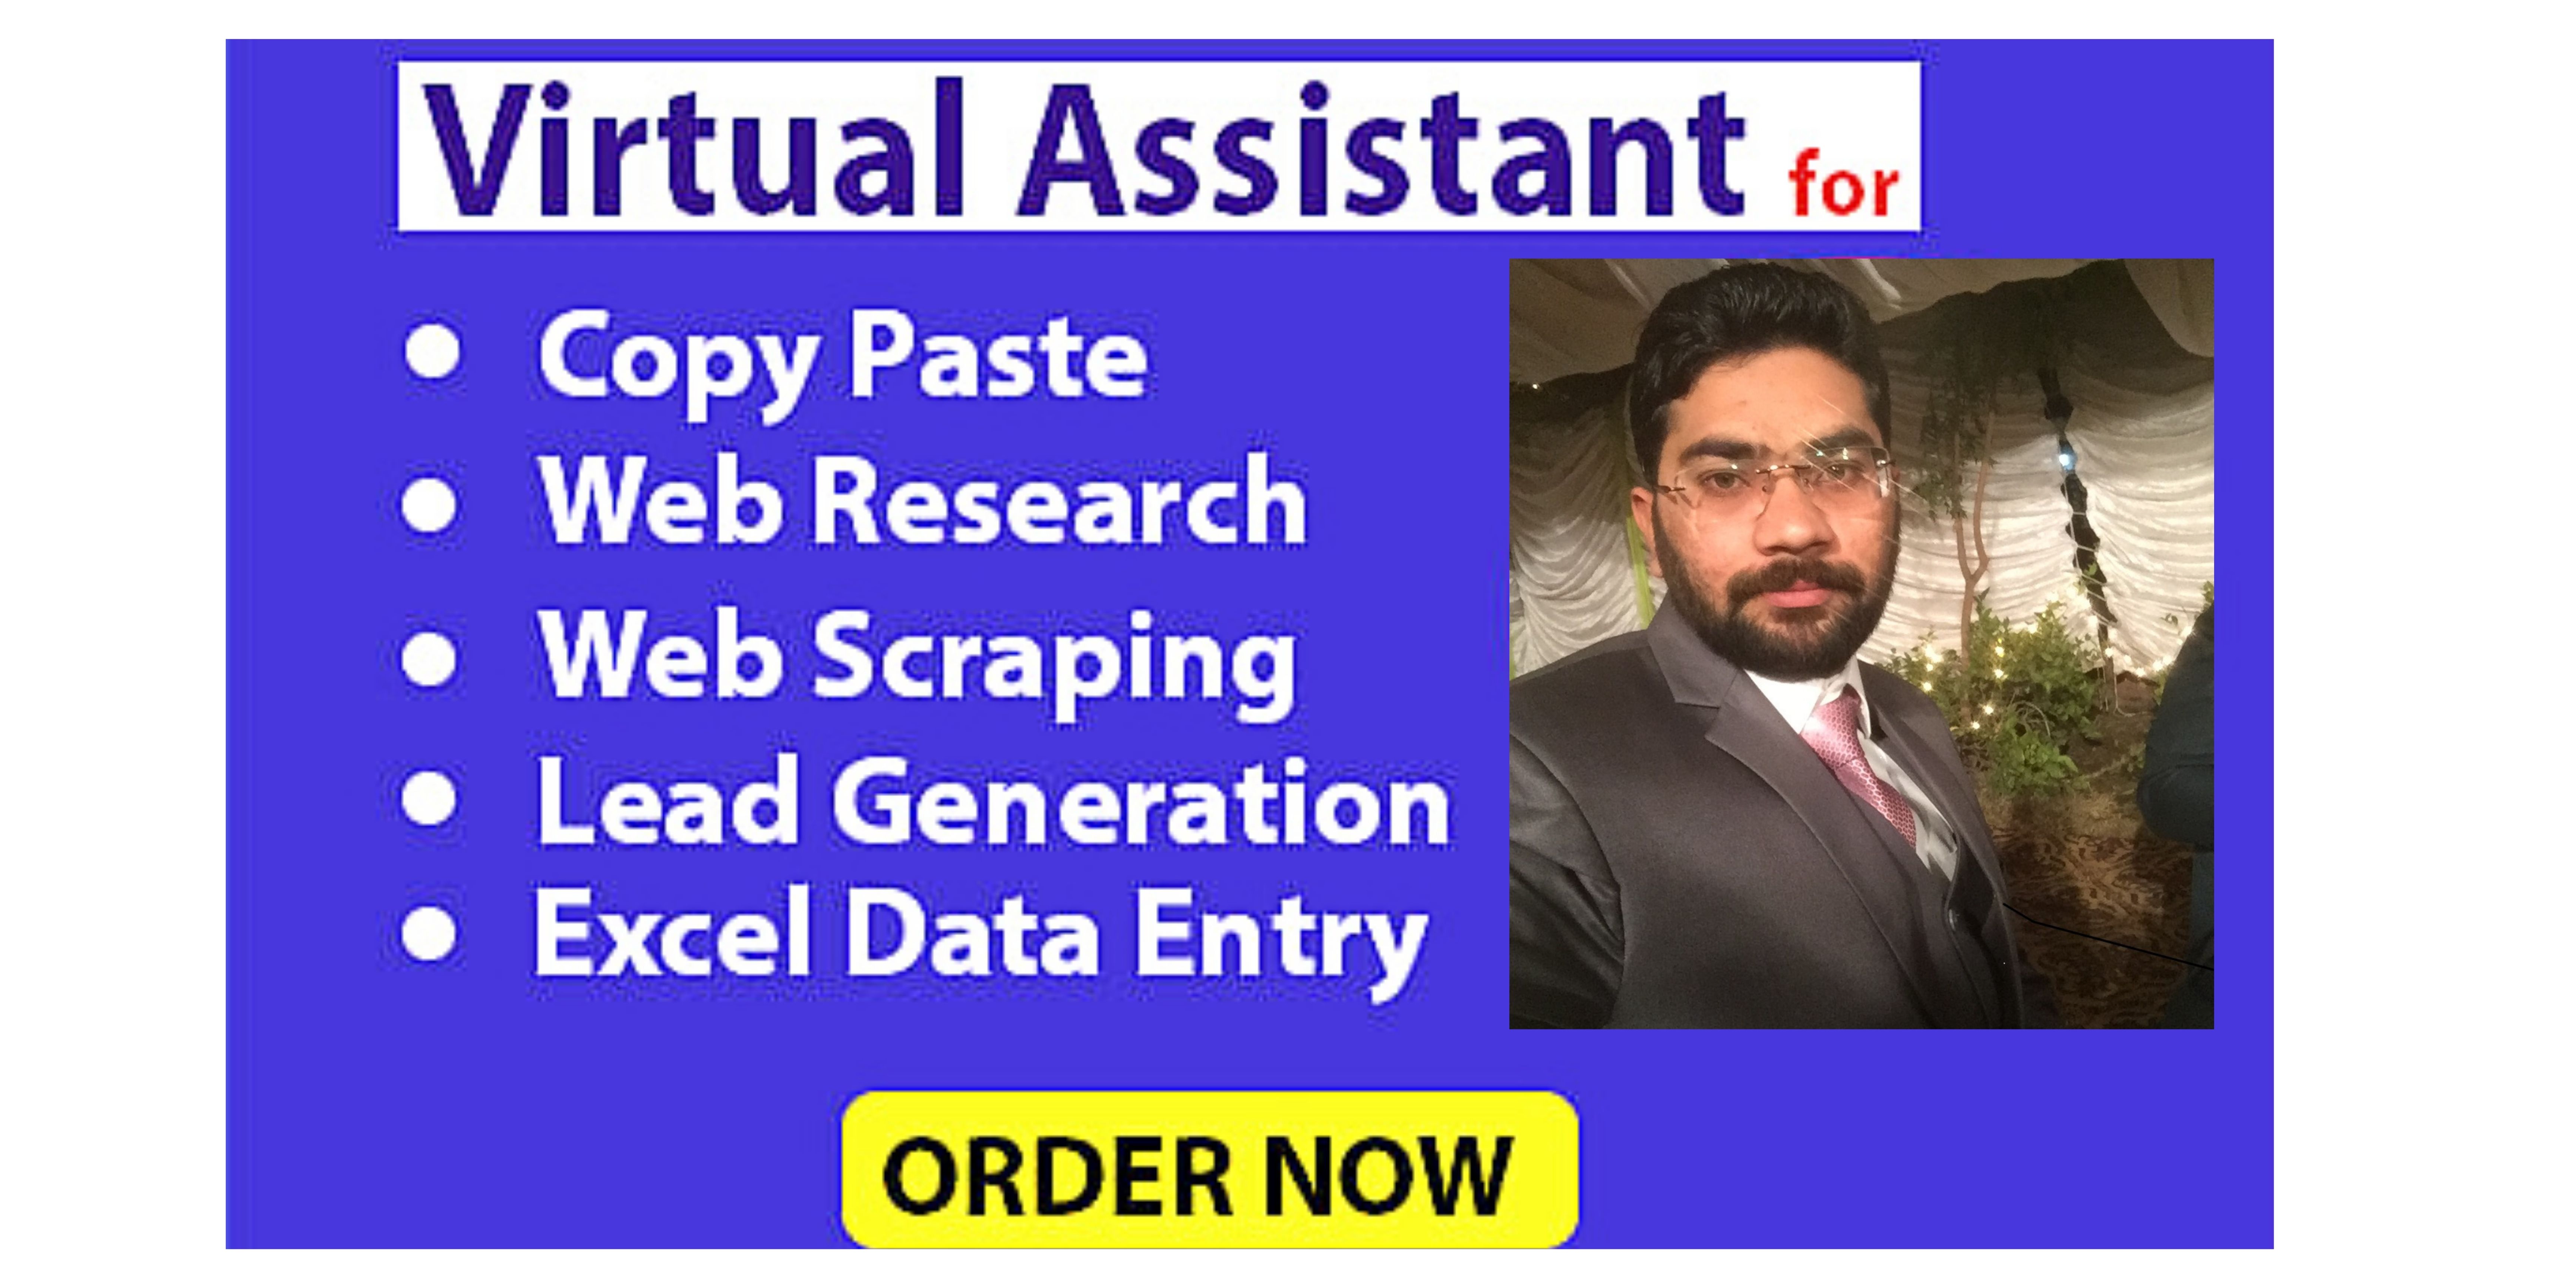 I will be your virtual assistant for excel data entry, data scraping and web research